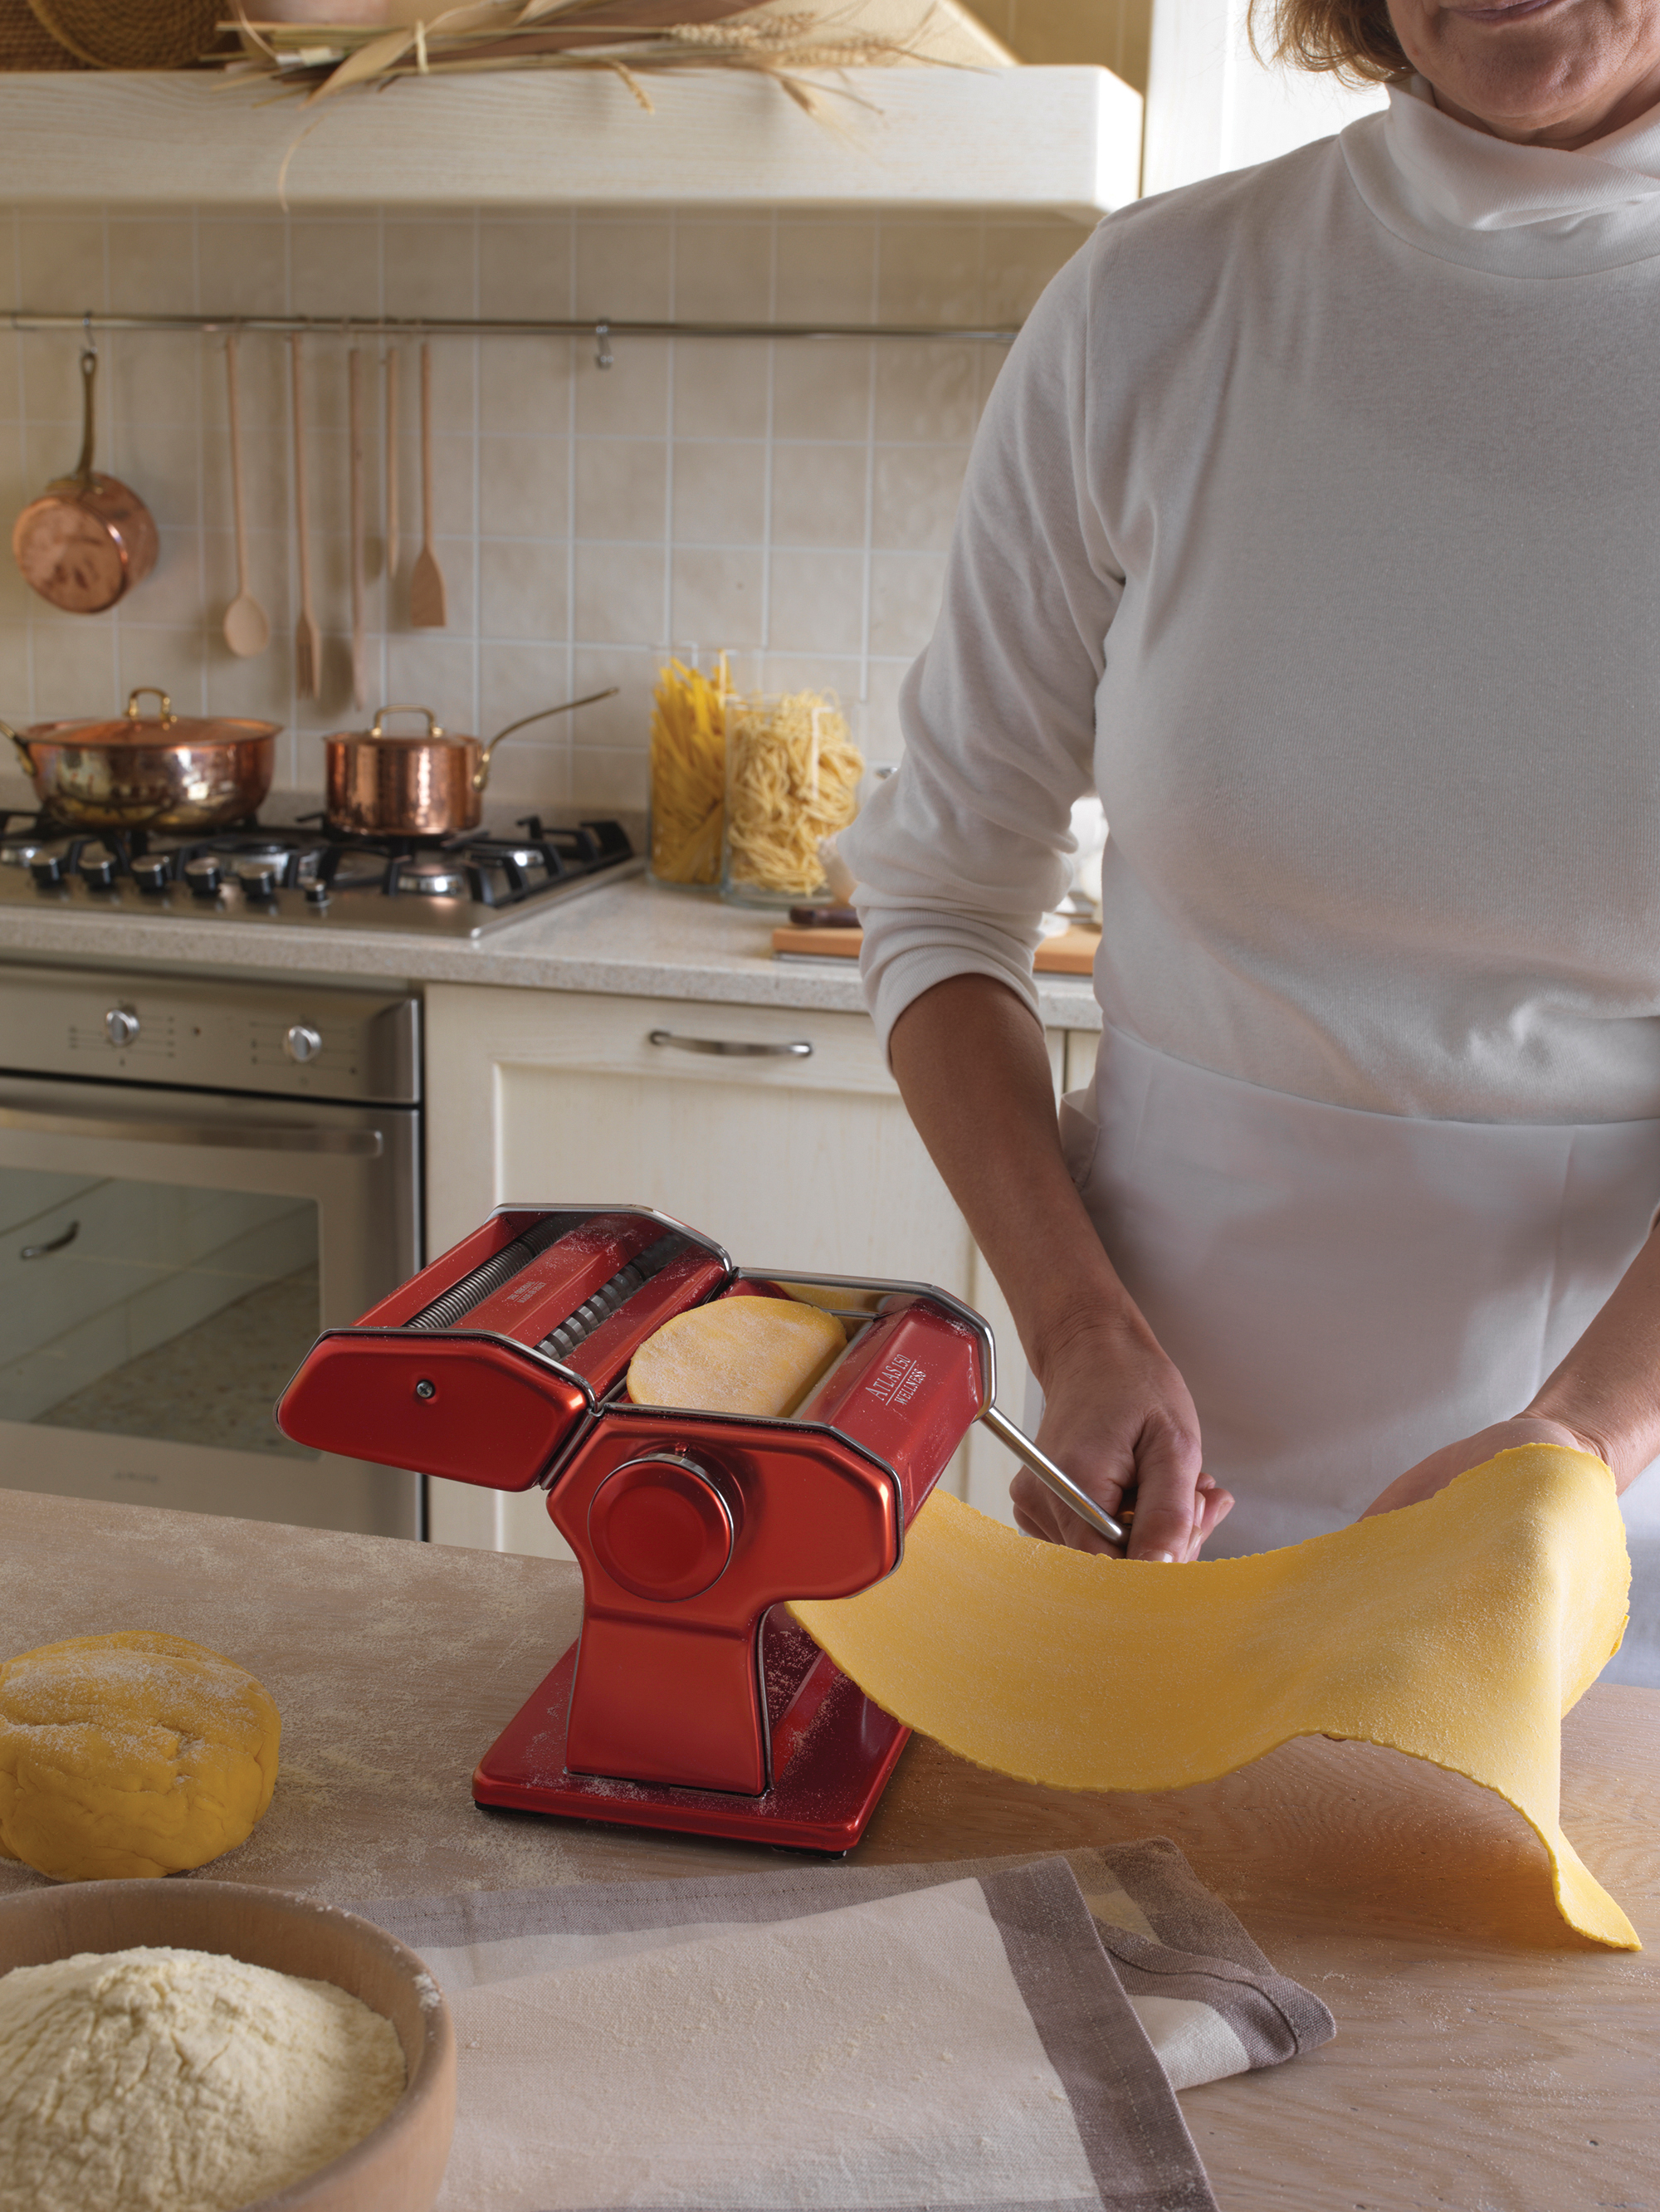 Marcato Atlas 150 Machine with Pasta Cutter, Hand Crank, and Instructions, Made in Italy, Red - image 3 of 3